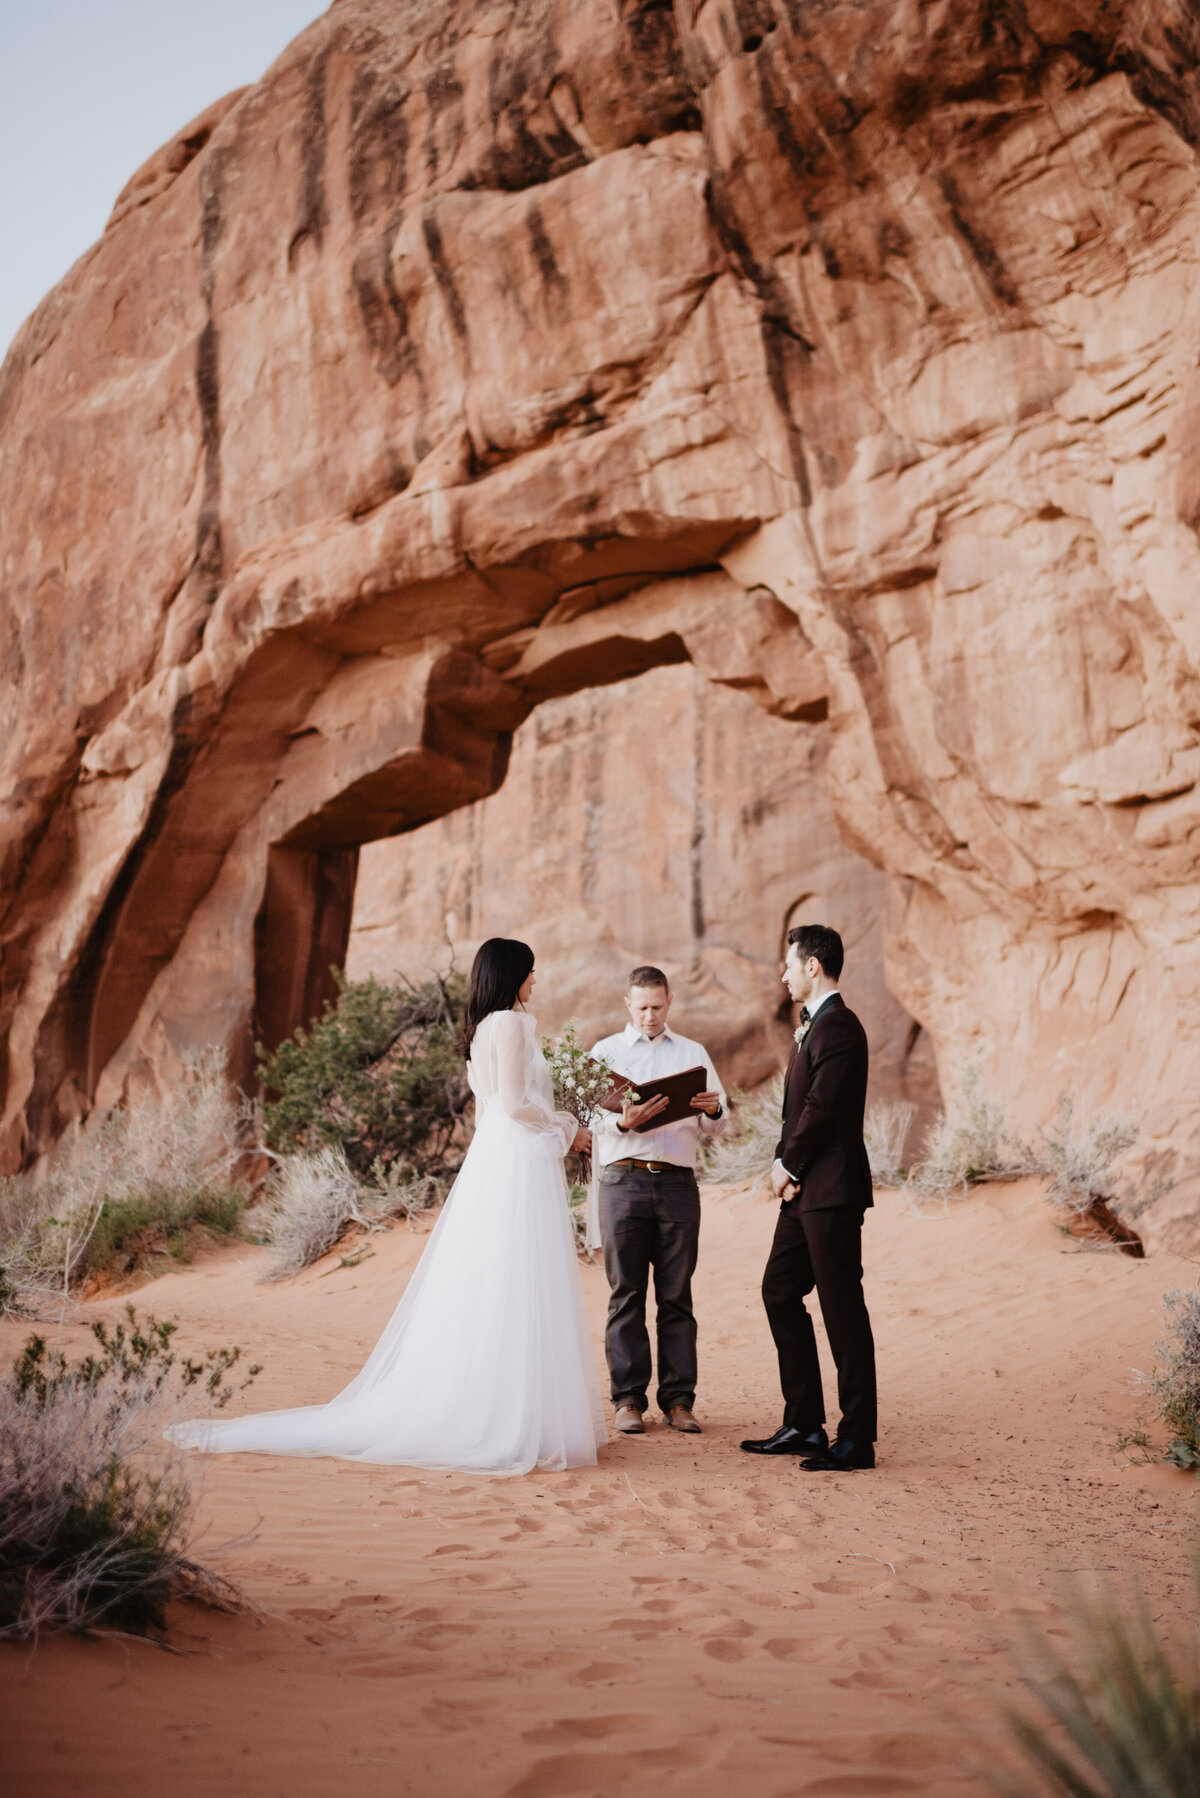 Utah elopement photographer captures bride and groom standing in Arches National Park during wedding ceremony